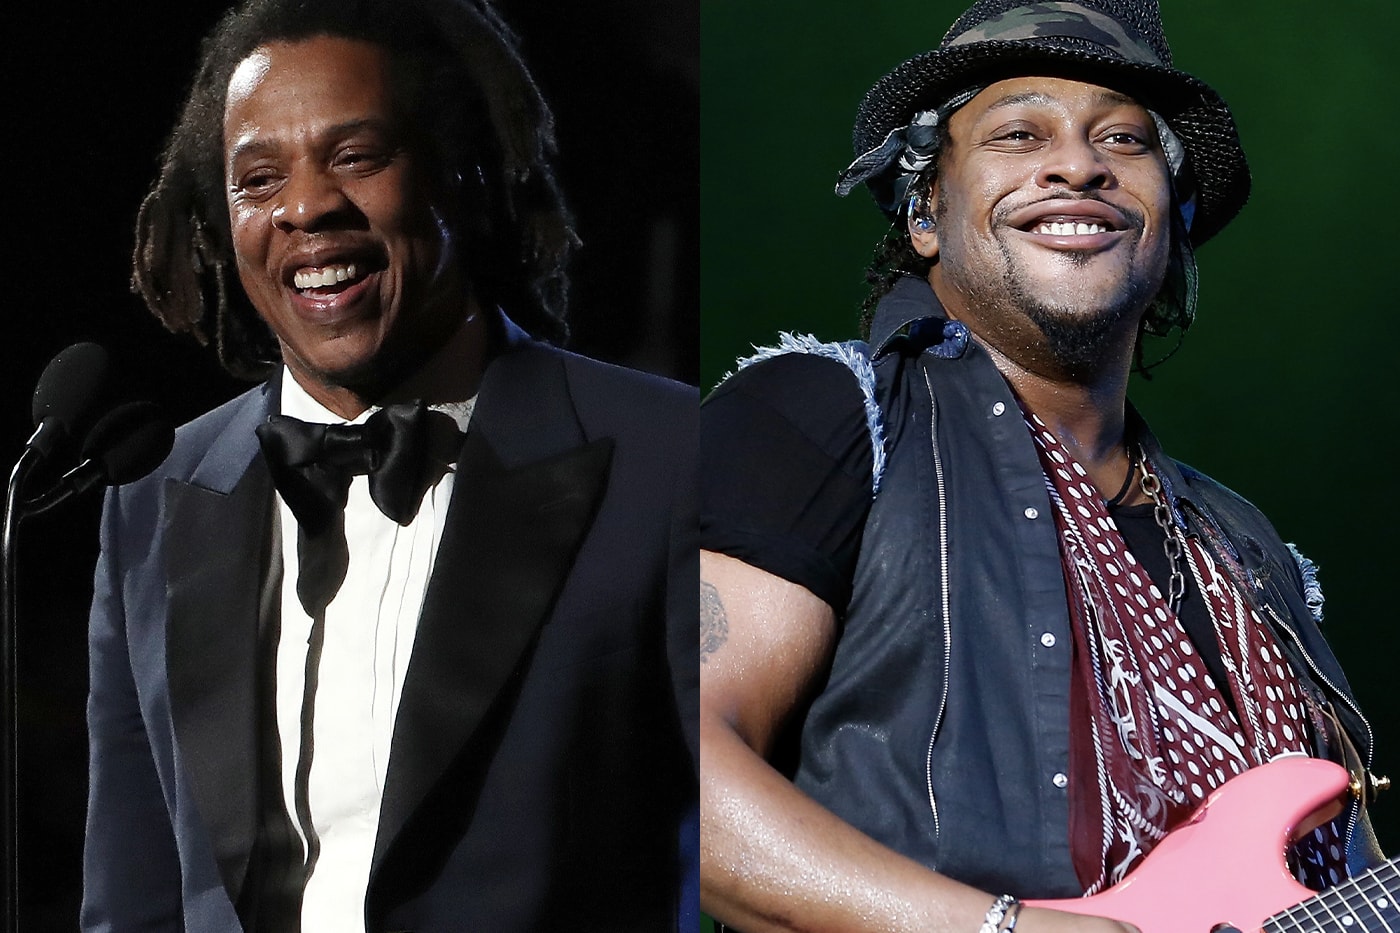 JAY-Z and D'Angelo Announce New Collaborative Track "I Want You Forever" rapper the book of clarence song jeymes samuel lil wayne doja cat singers tracklist